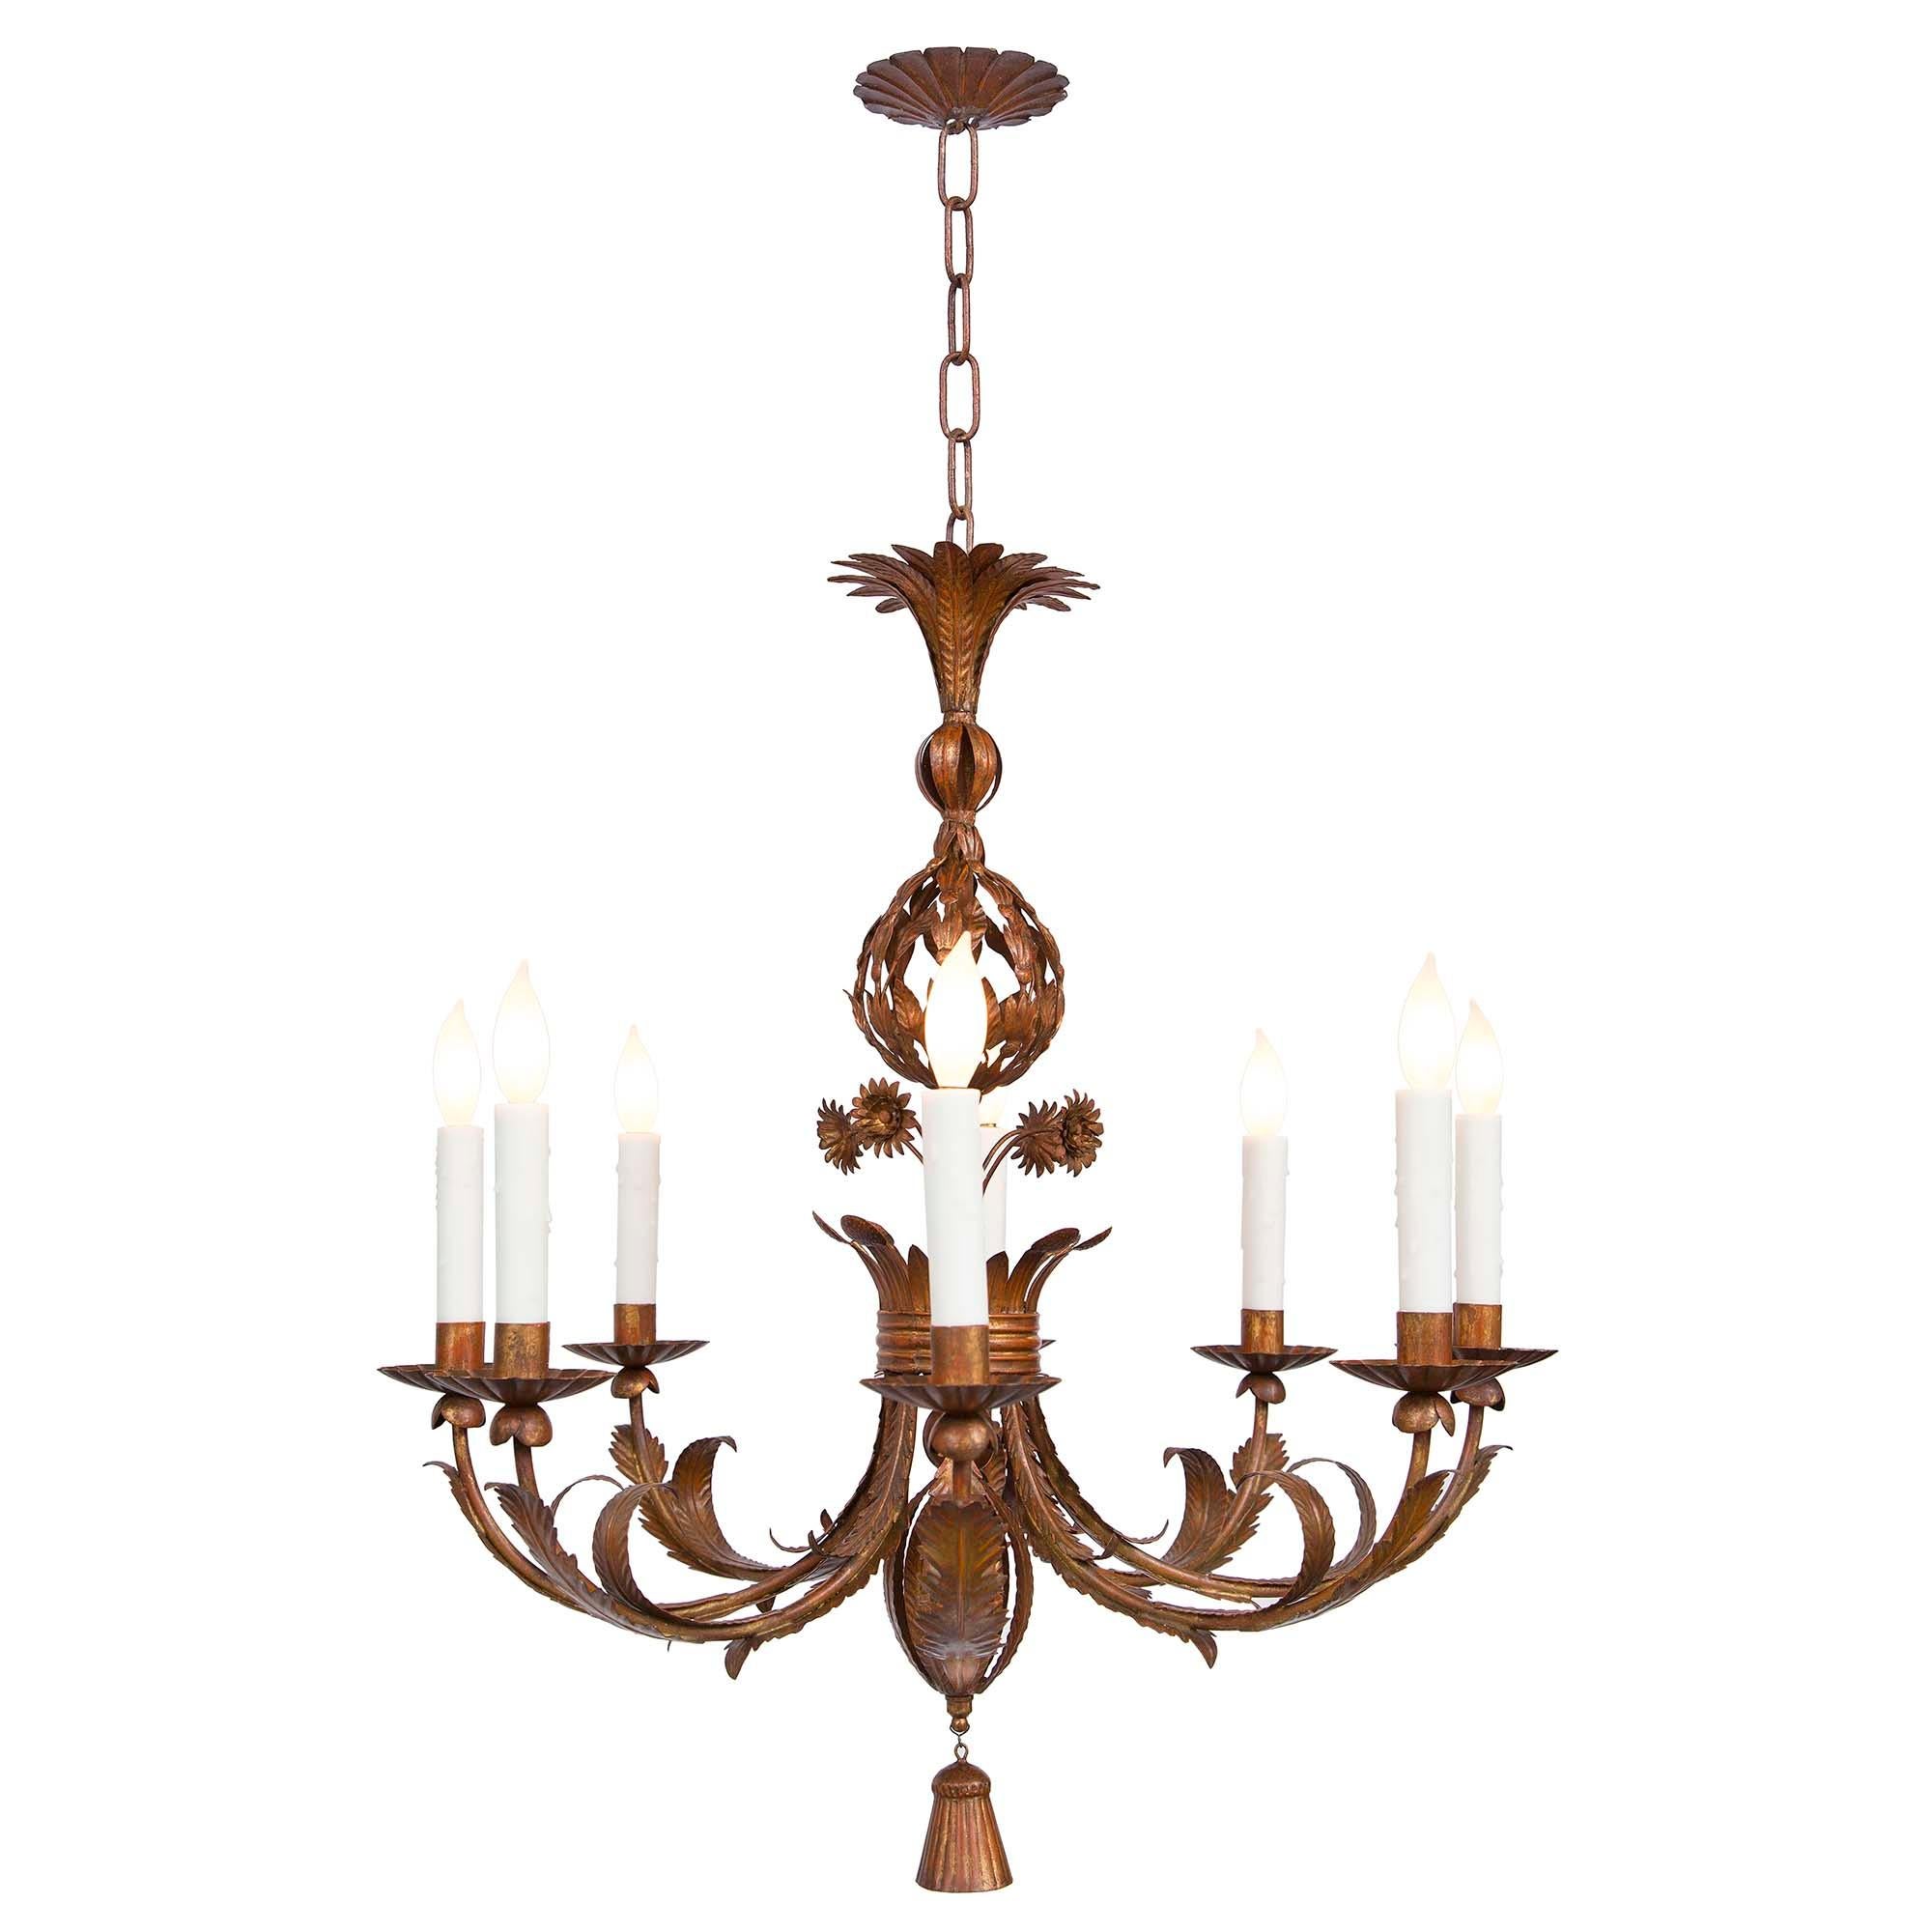 A beautiful Italian turn of the century pressed metal eight arm chandelier. The chandelier is centered by a charming tassel pendant below foliate movements which lead out and adorn each arm. At the center is a crown like design with lovely pressed